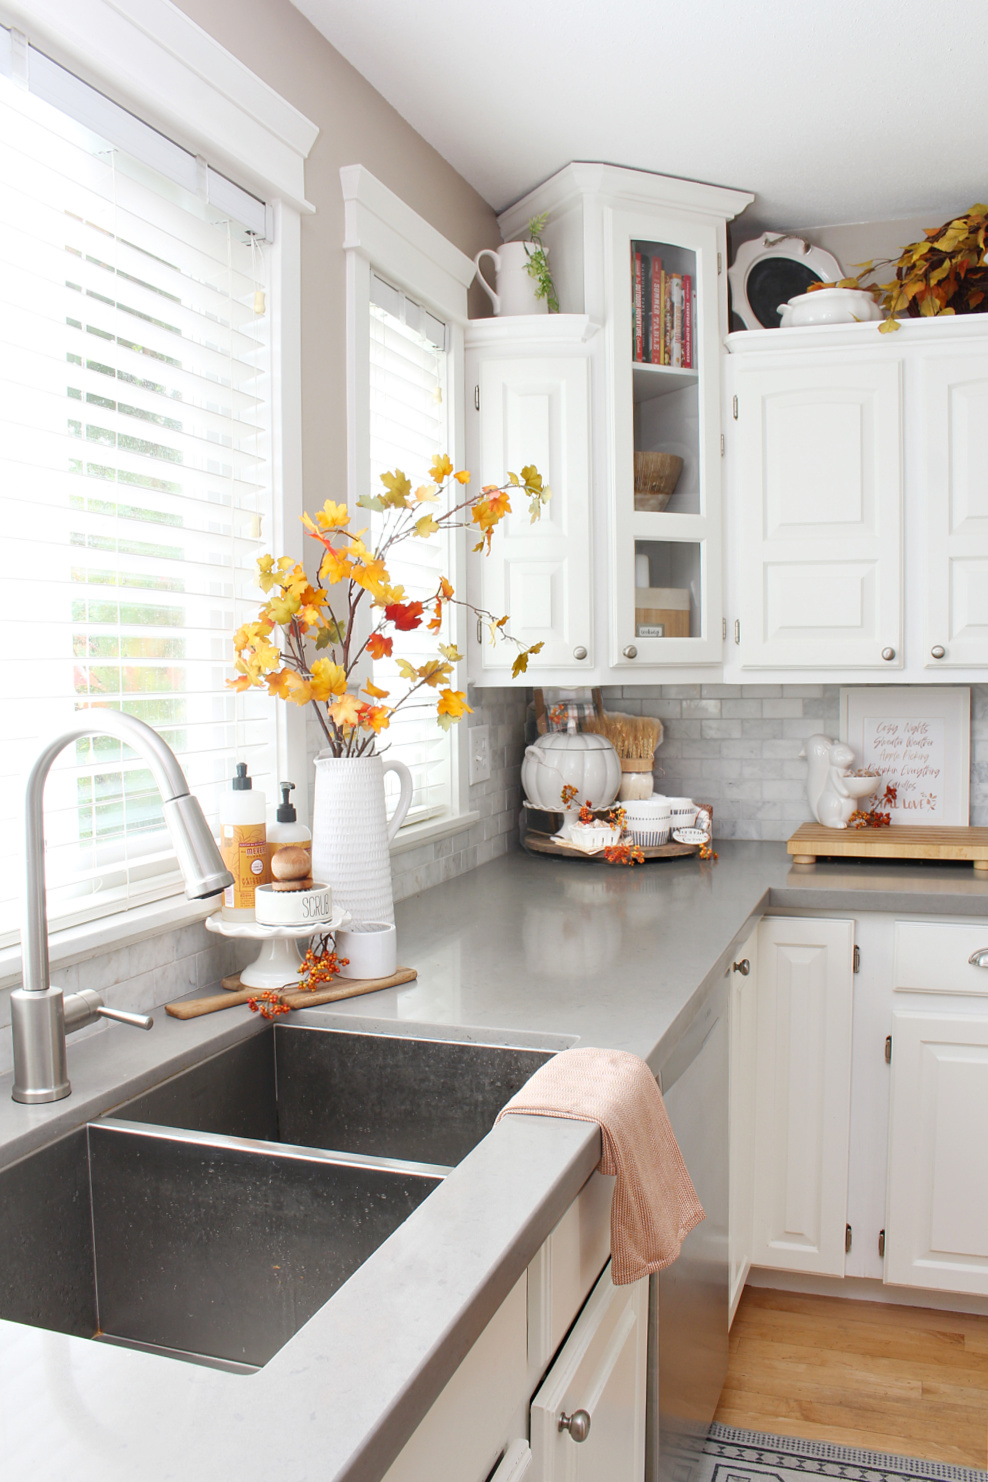 https://www.cleanandscentsible.com/wp-content/uploads/2021/09/kitchen-fall-decor-ideas-6-Clean-and-Scentsible.jpg